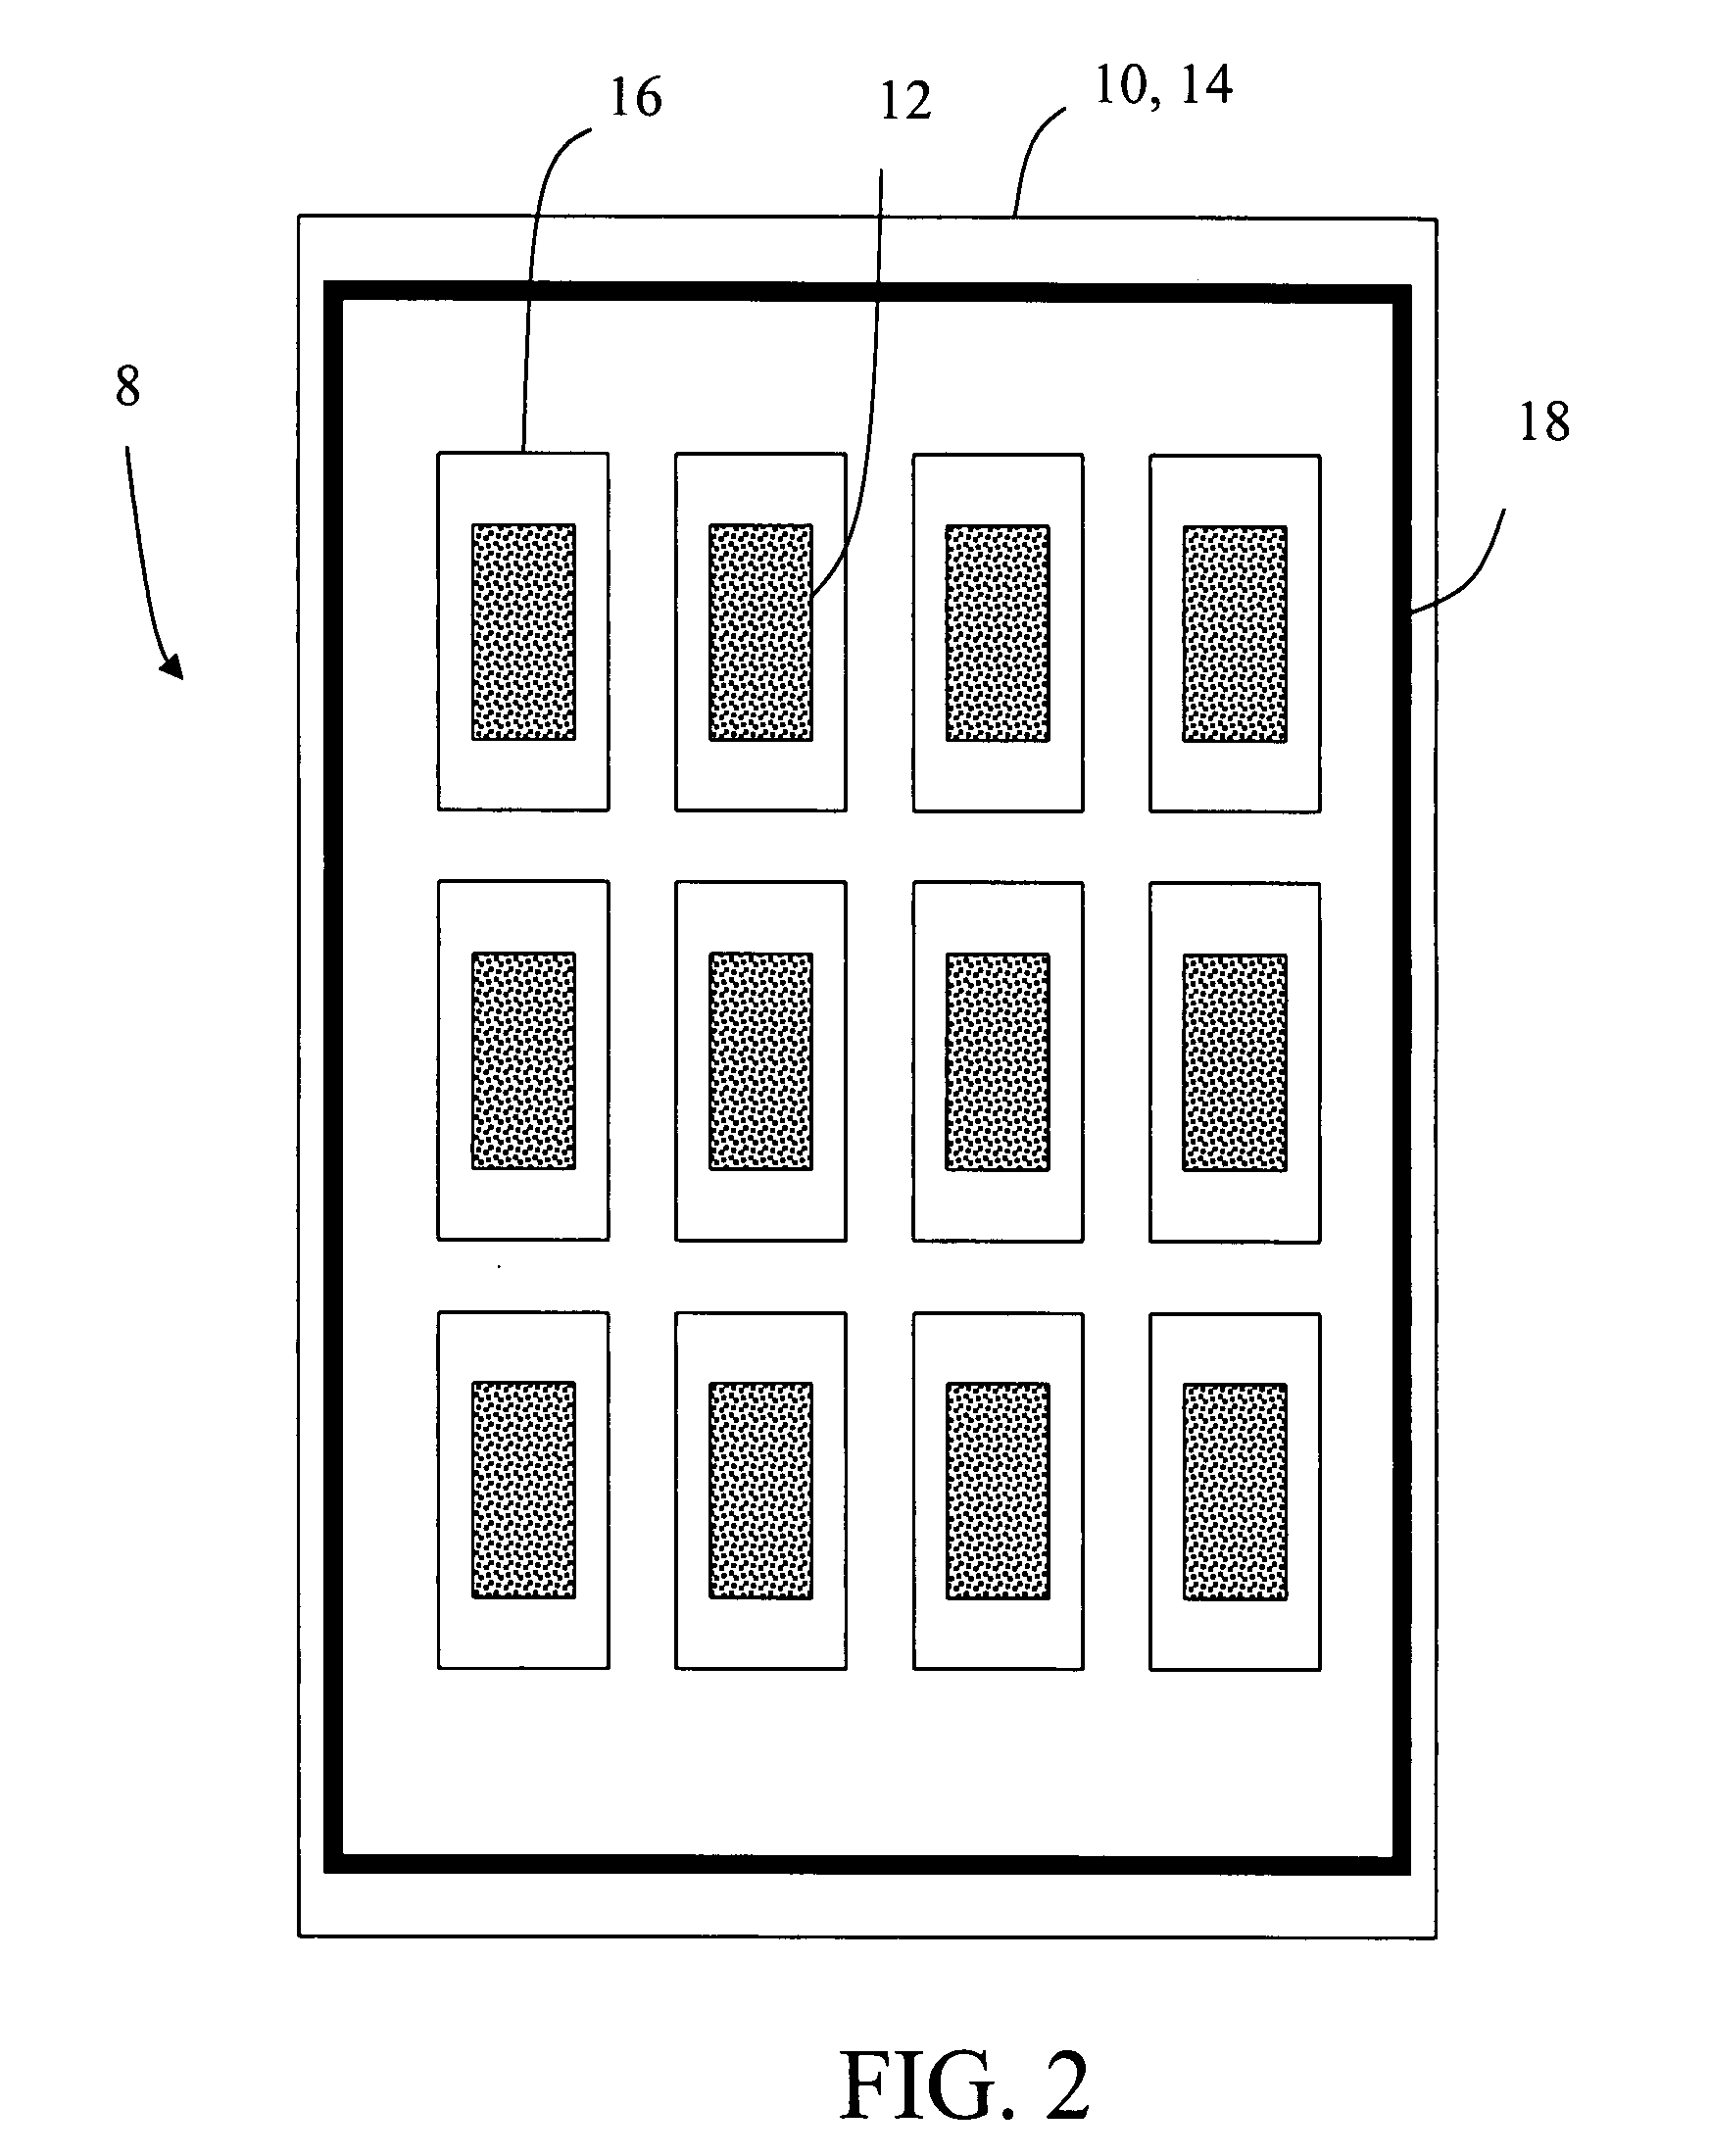 Method for forming a temporary hermetic seal for an OLED display device